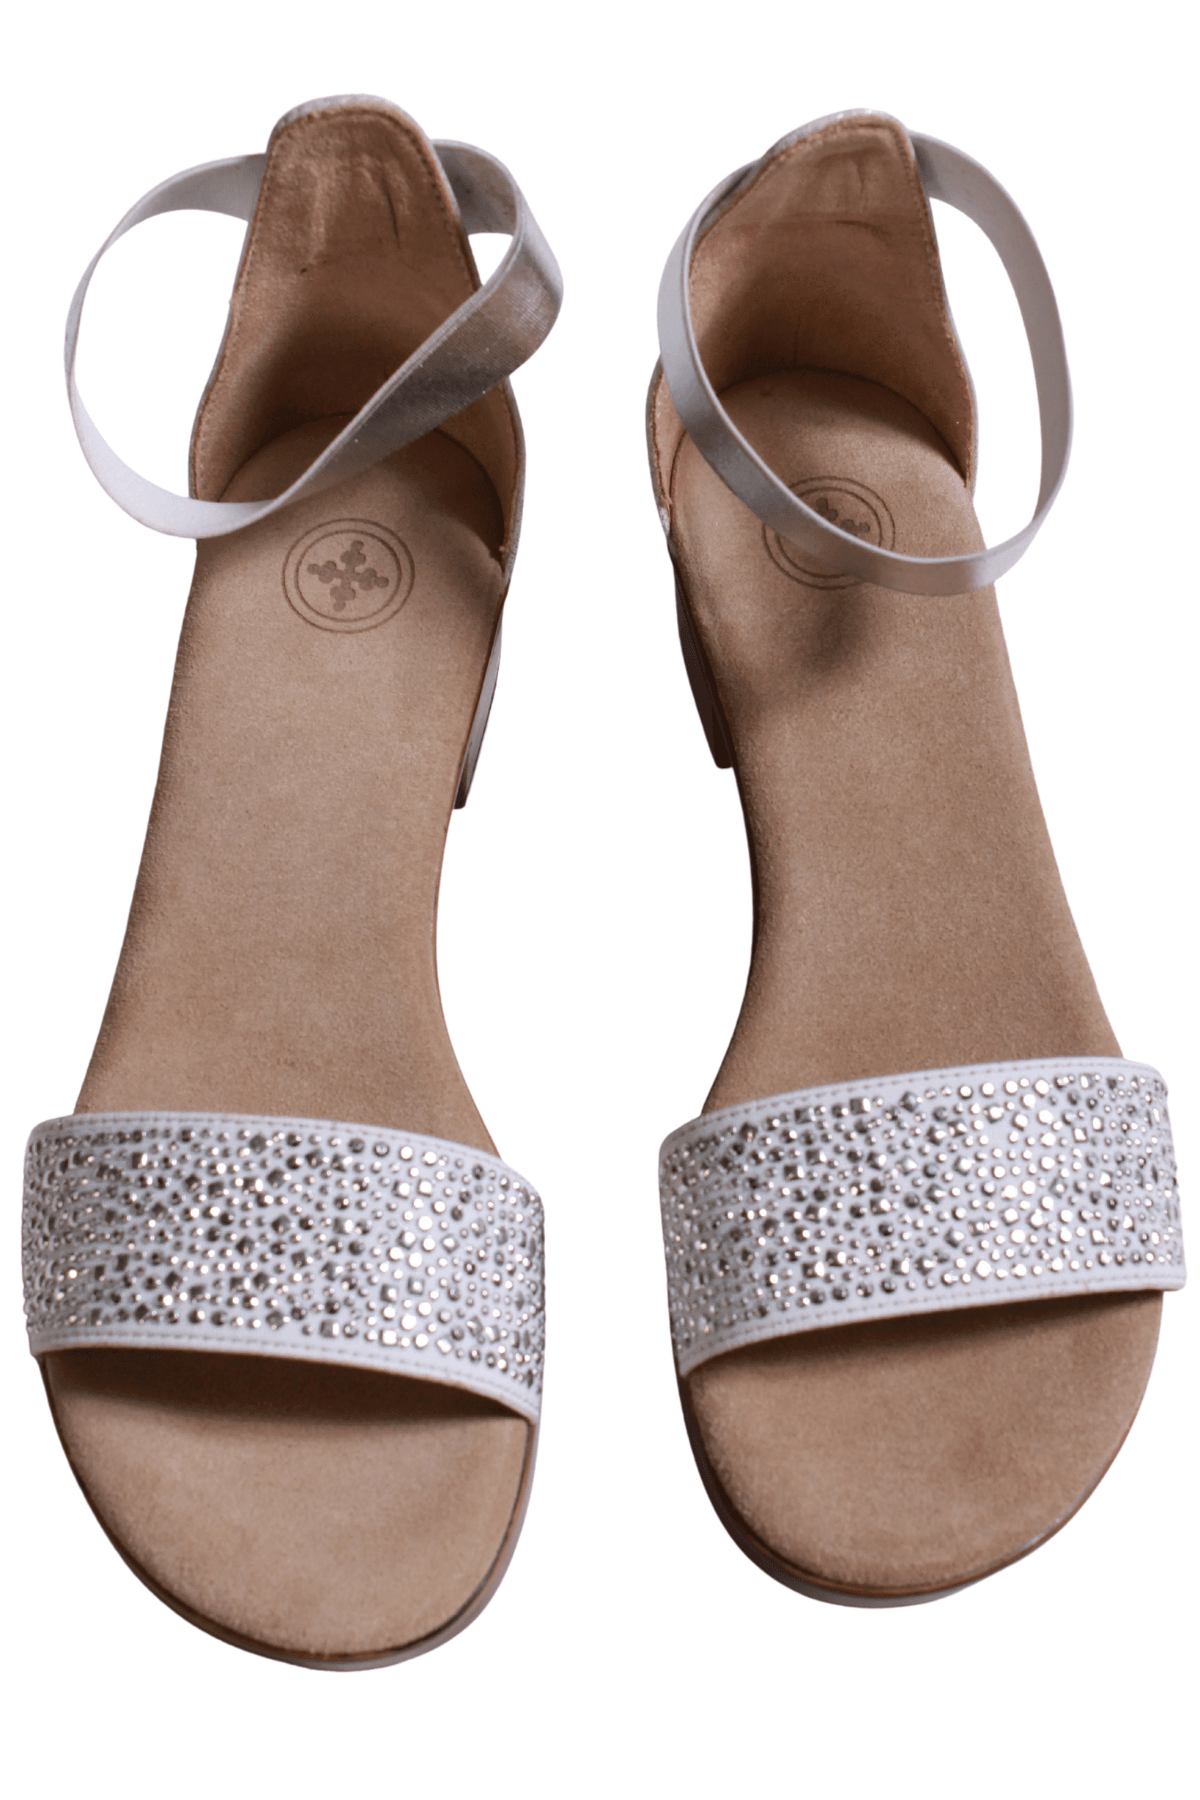 silver sandal has a sparkled toe strap and a 1" heel  with an elastic band ankle strap